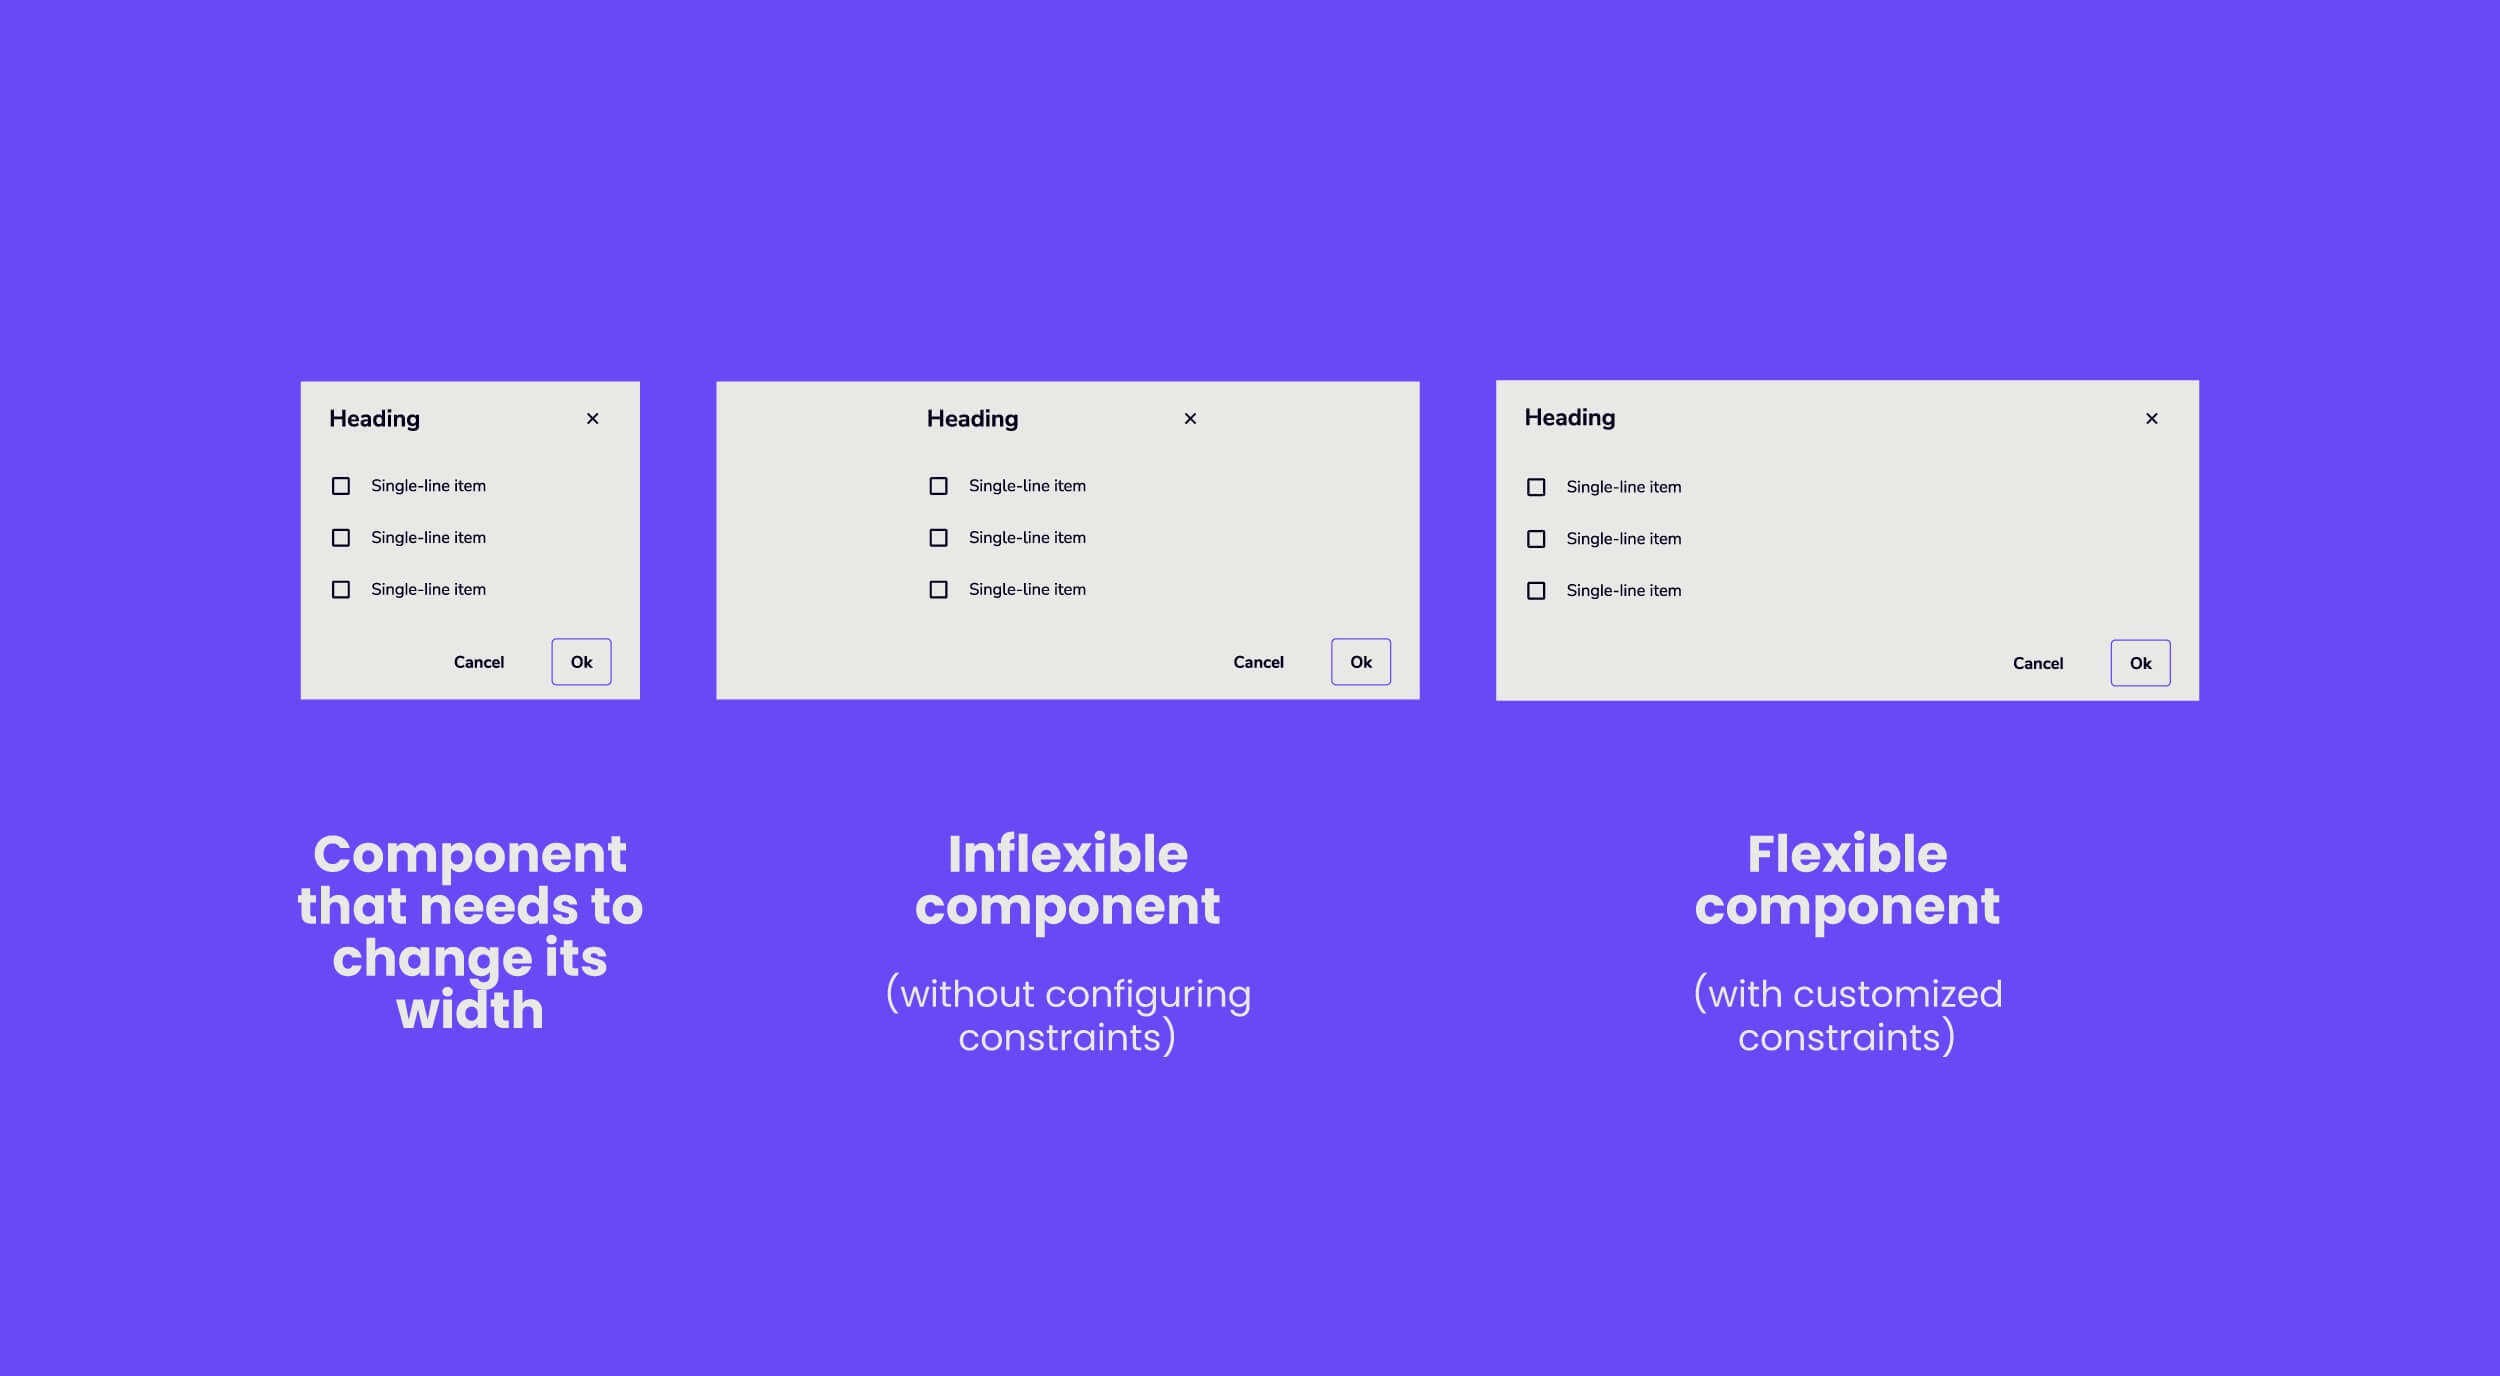 Image compares a flexible component with customized constraints and an inflexible component in Figma